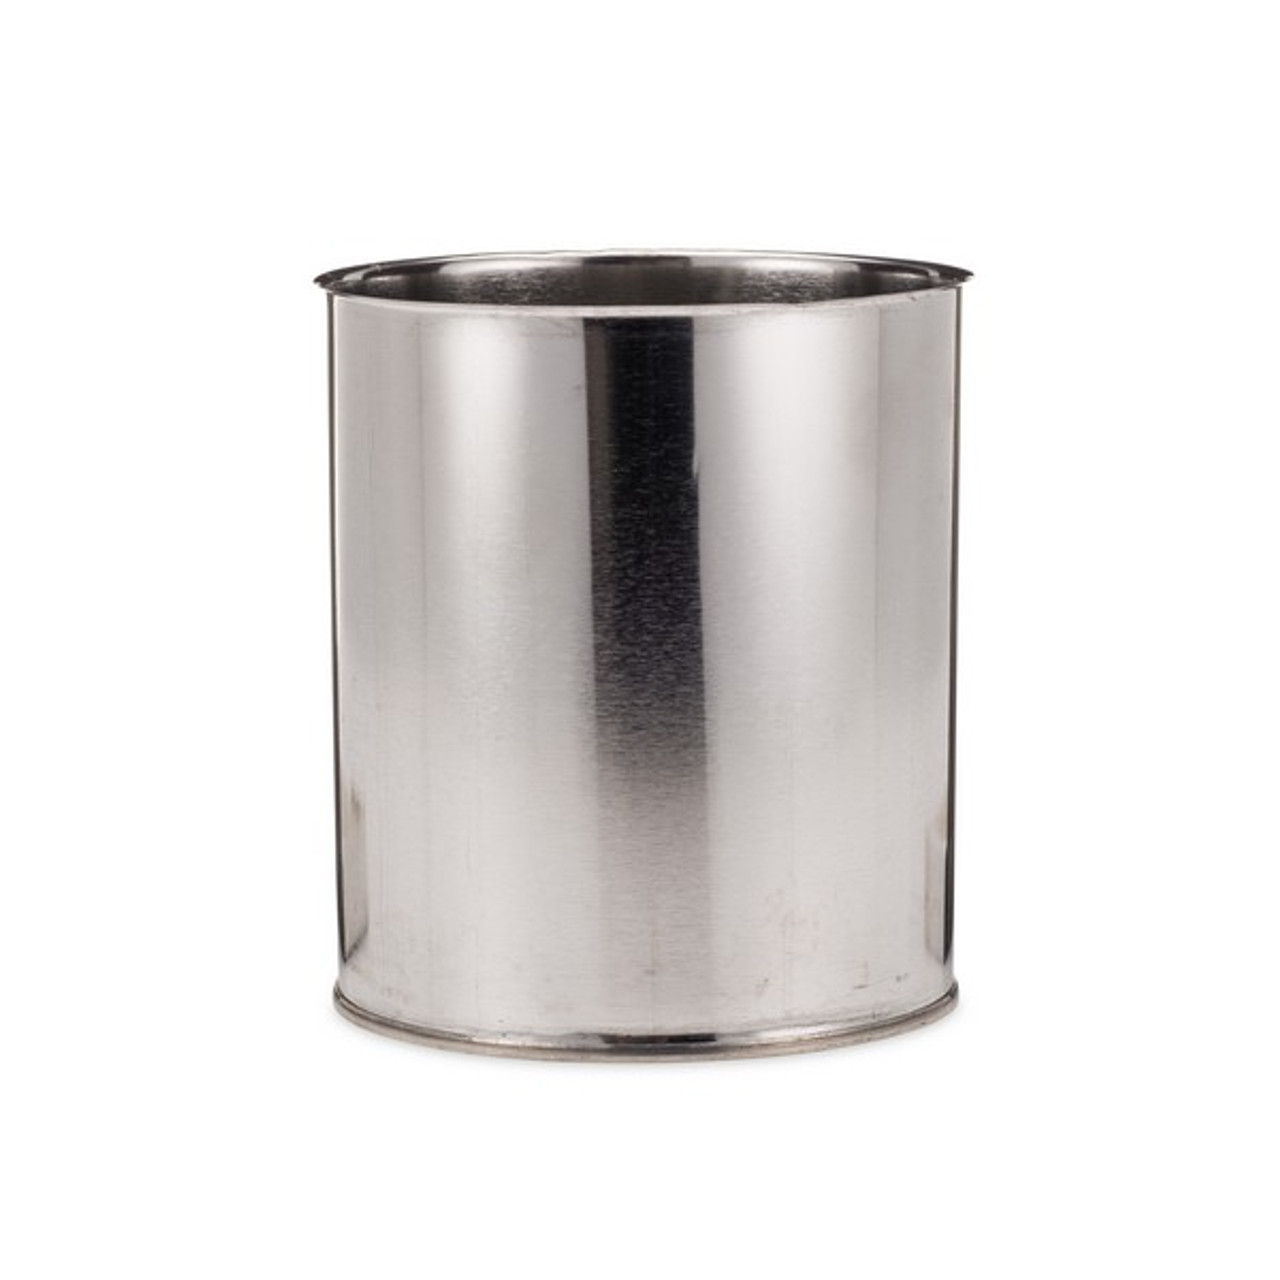 32 oz Unlined Tin-Plated Steel Cans (Sample) | Berlin